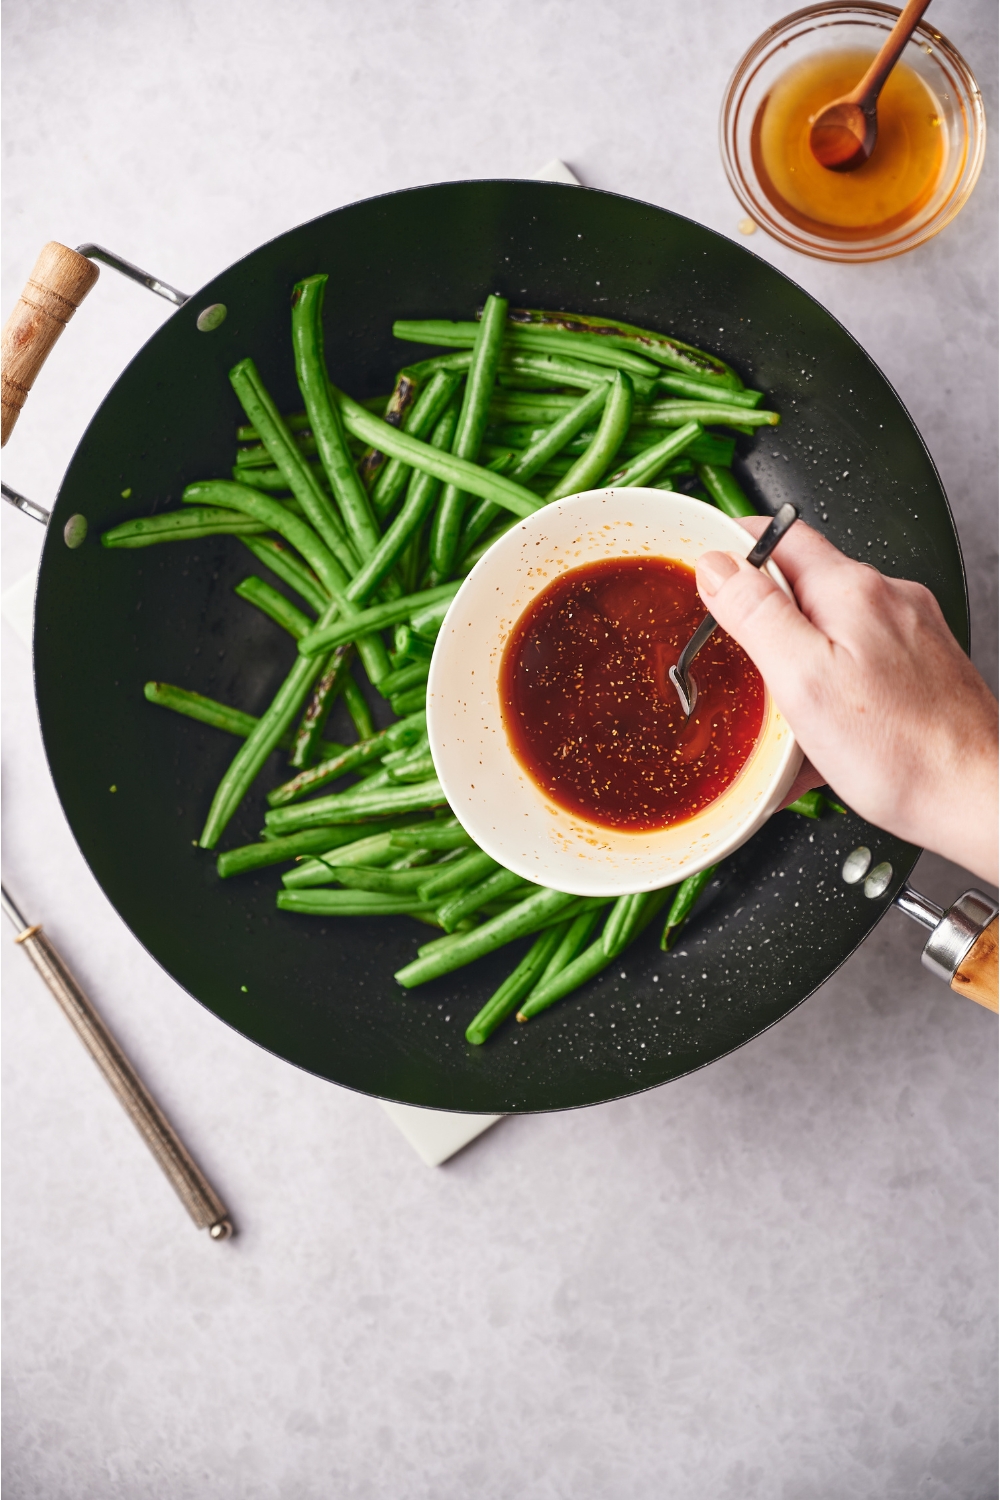 Black skillet with green beans and a hand holding a white ramekin above the skillet. The ramekin has a brown sauce. Next to the skillet is a small bowl of honey.